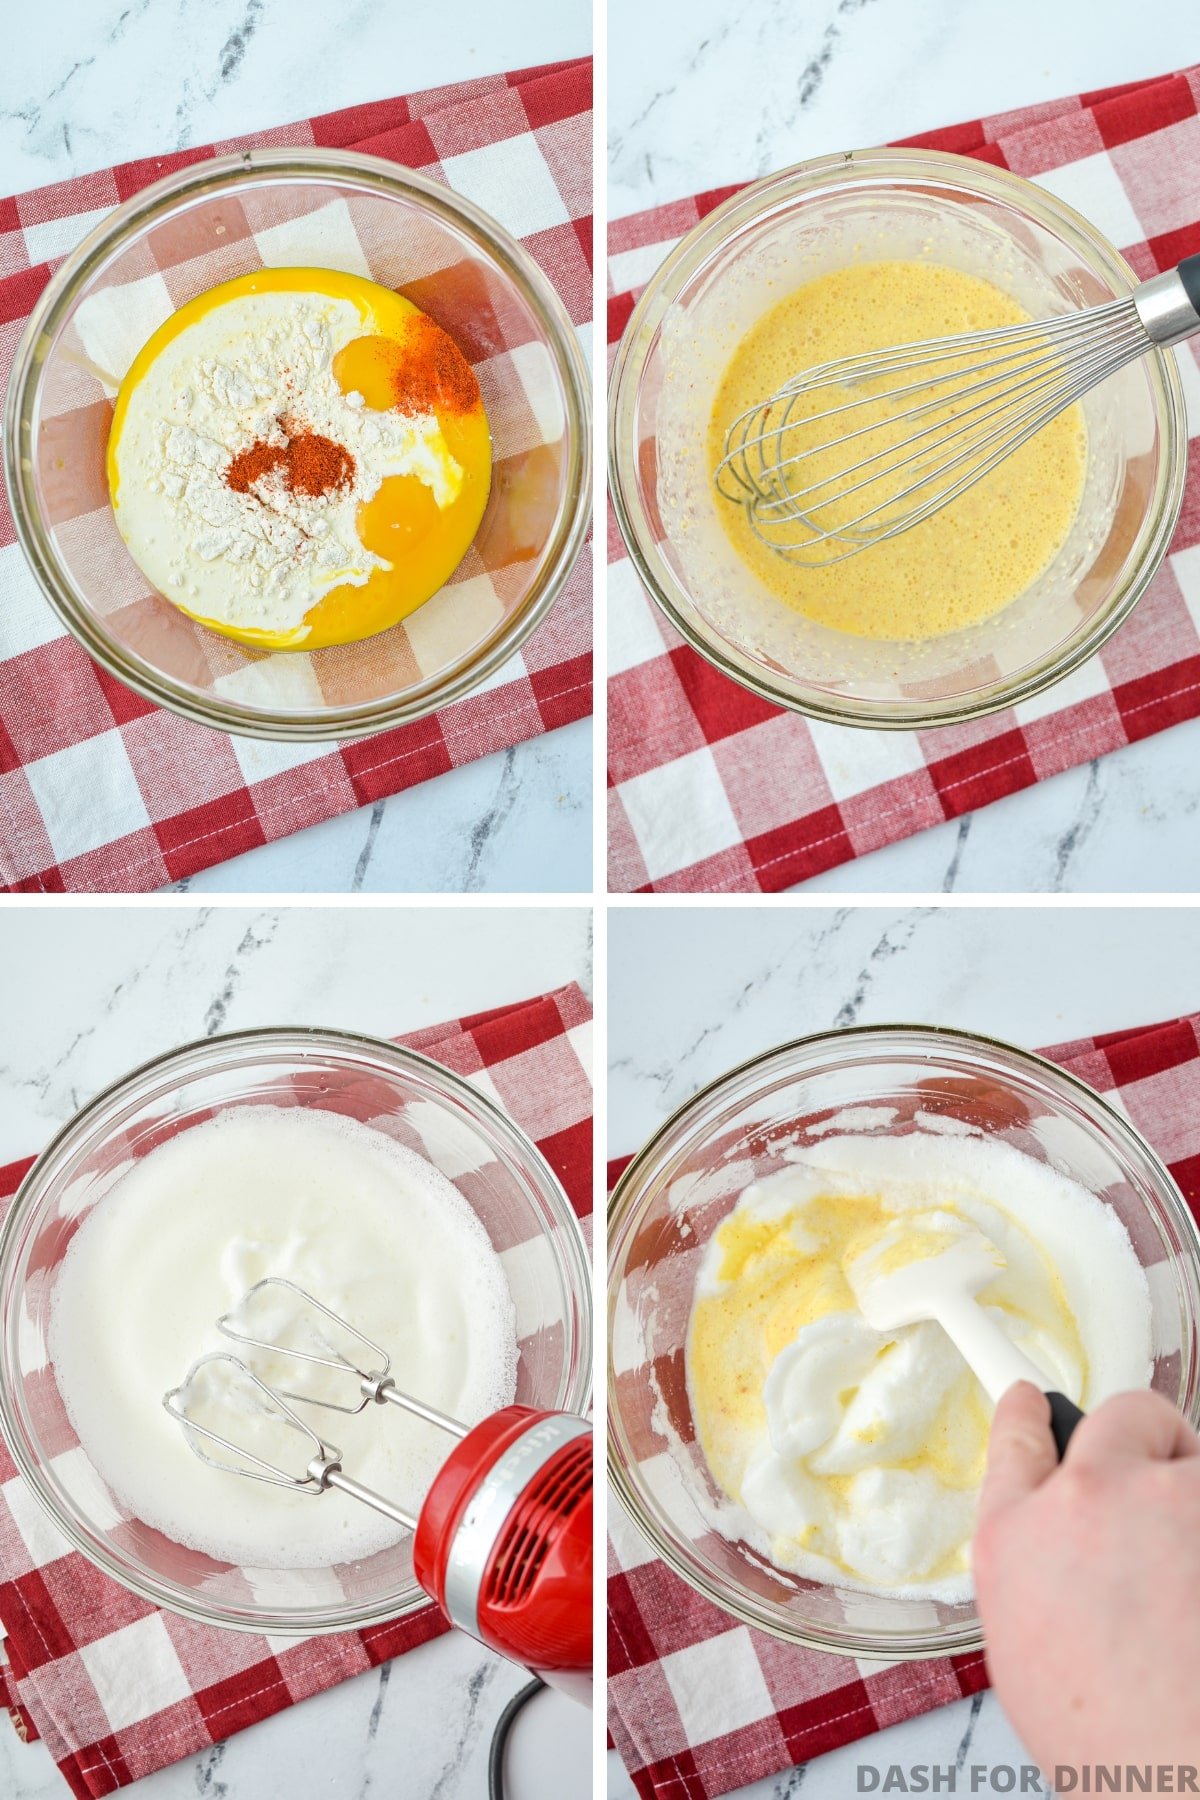 Whisking eggs with other ingredients, then folding in egg whites.